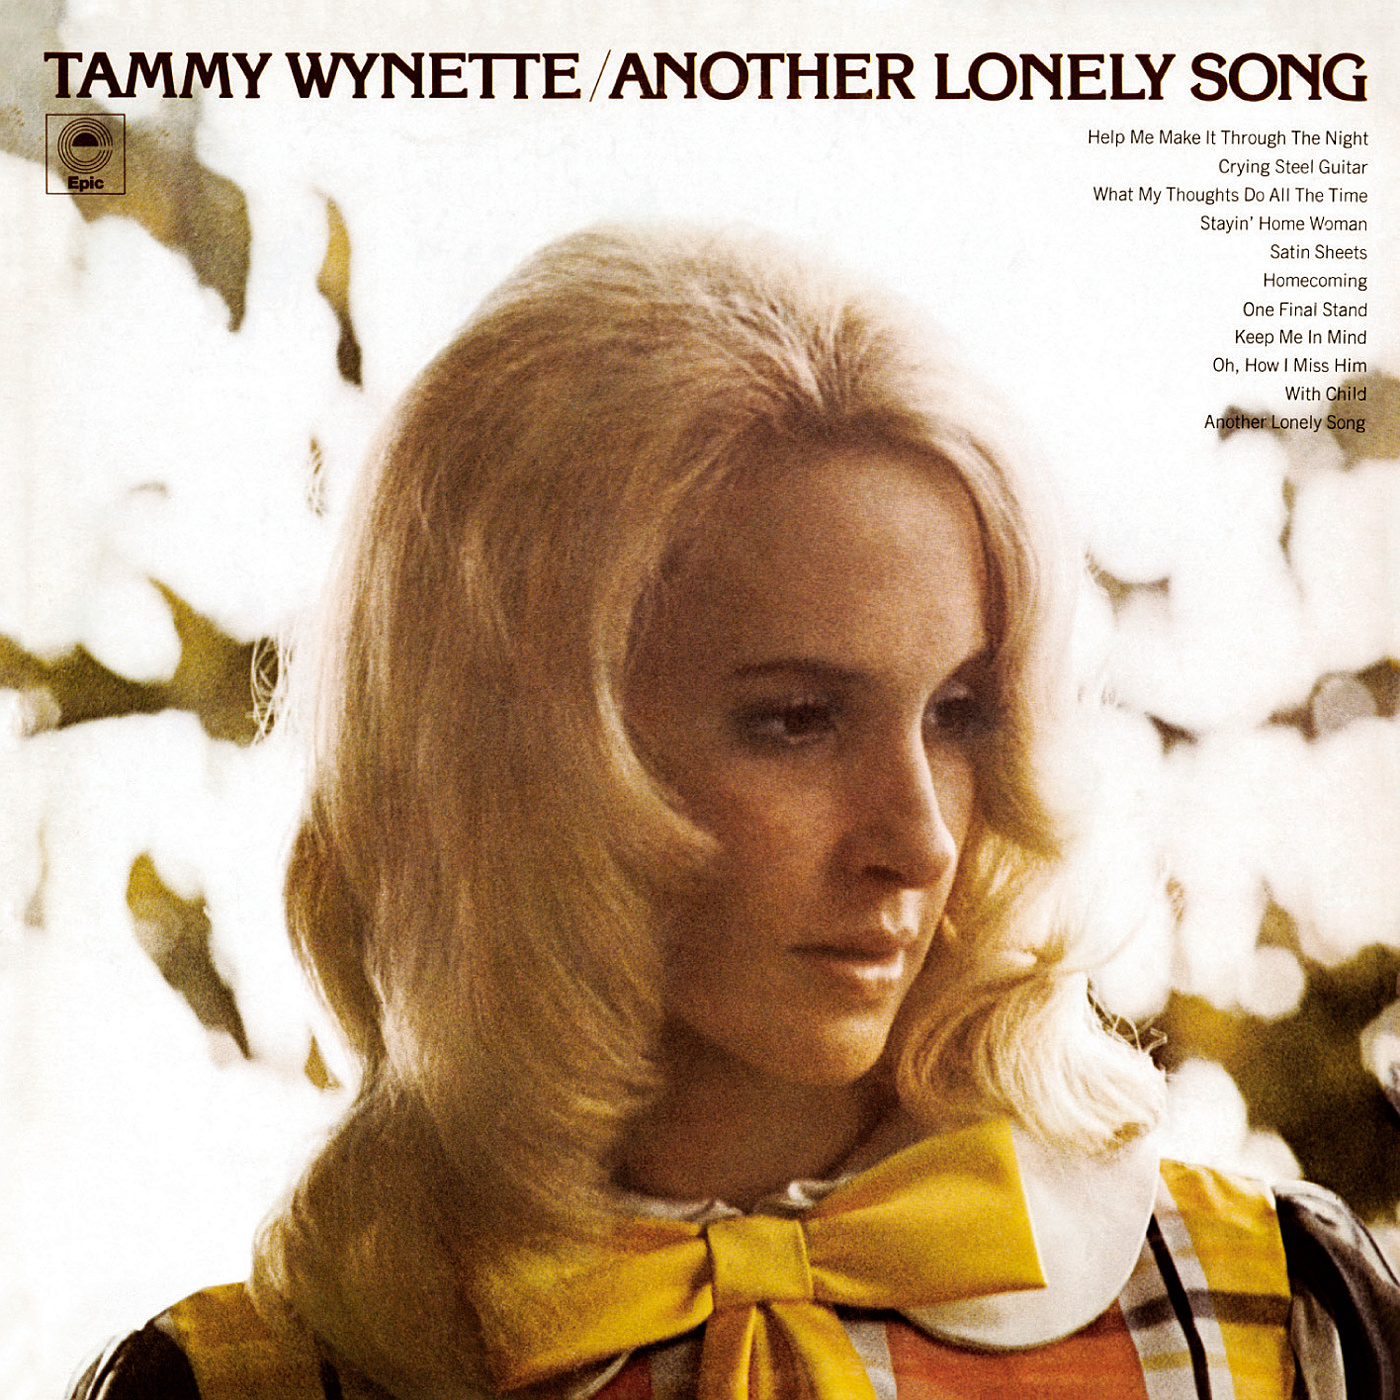 Tammy Wynette - Another Lonely Song (1974/2014) [Qobuz FLAC 24bit/96kHz]